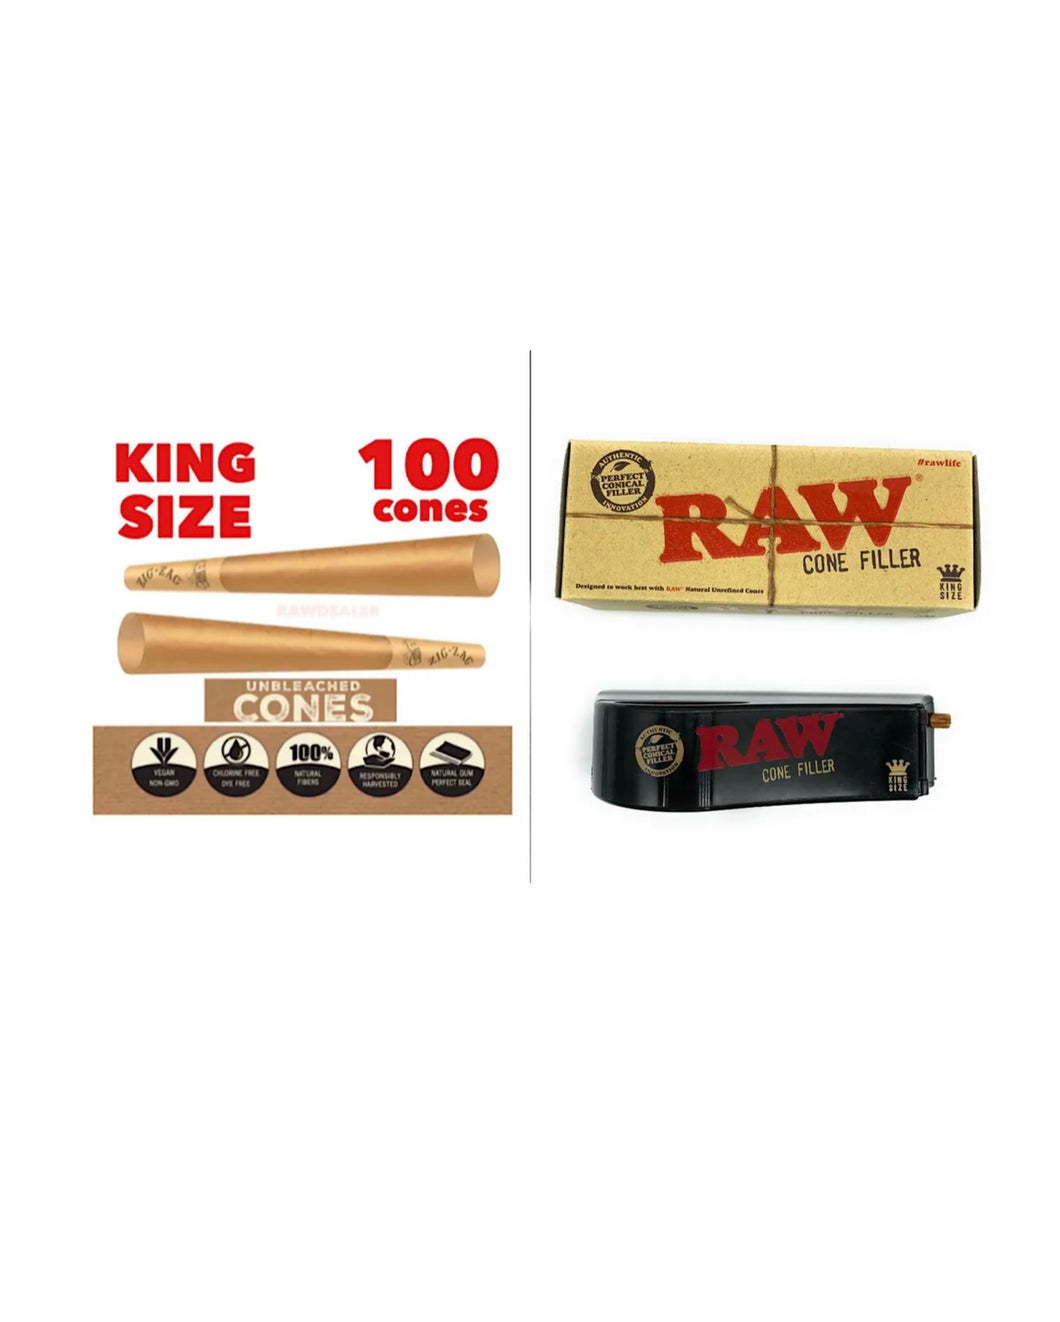 Zig Zag king size Unbleached Cone(100PK, 50PK)+raw king size cone Shooter filler